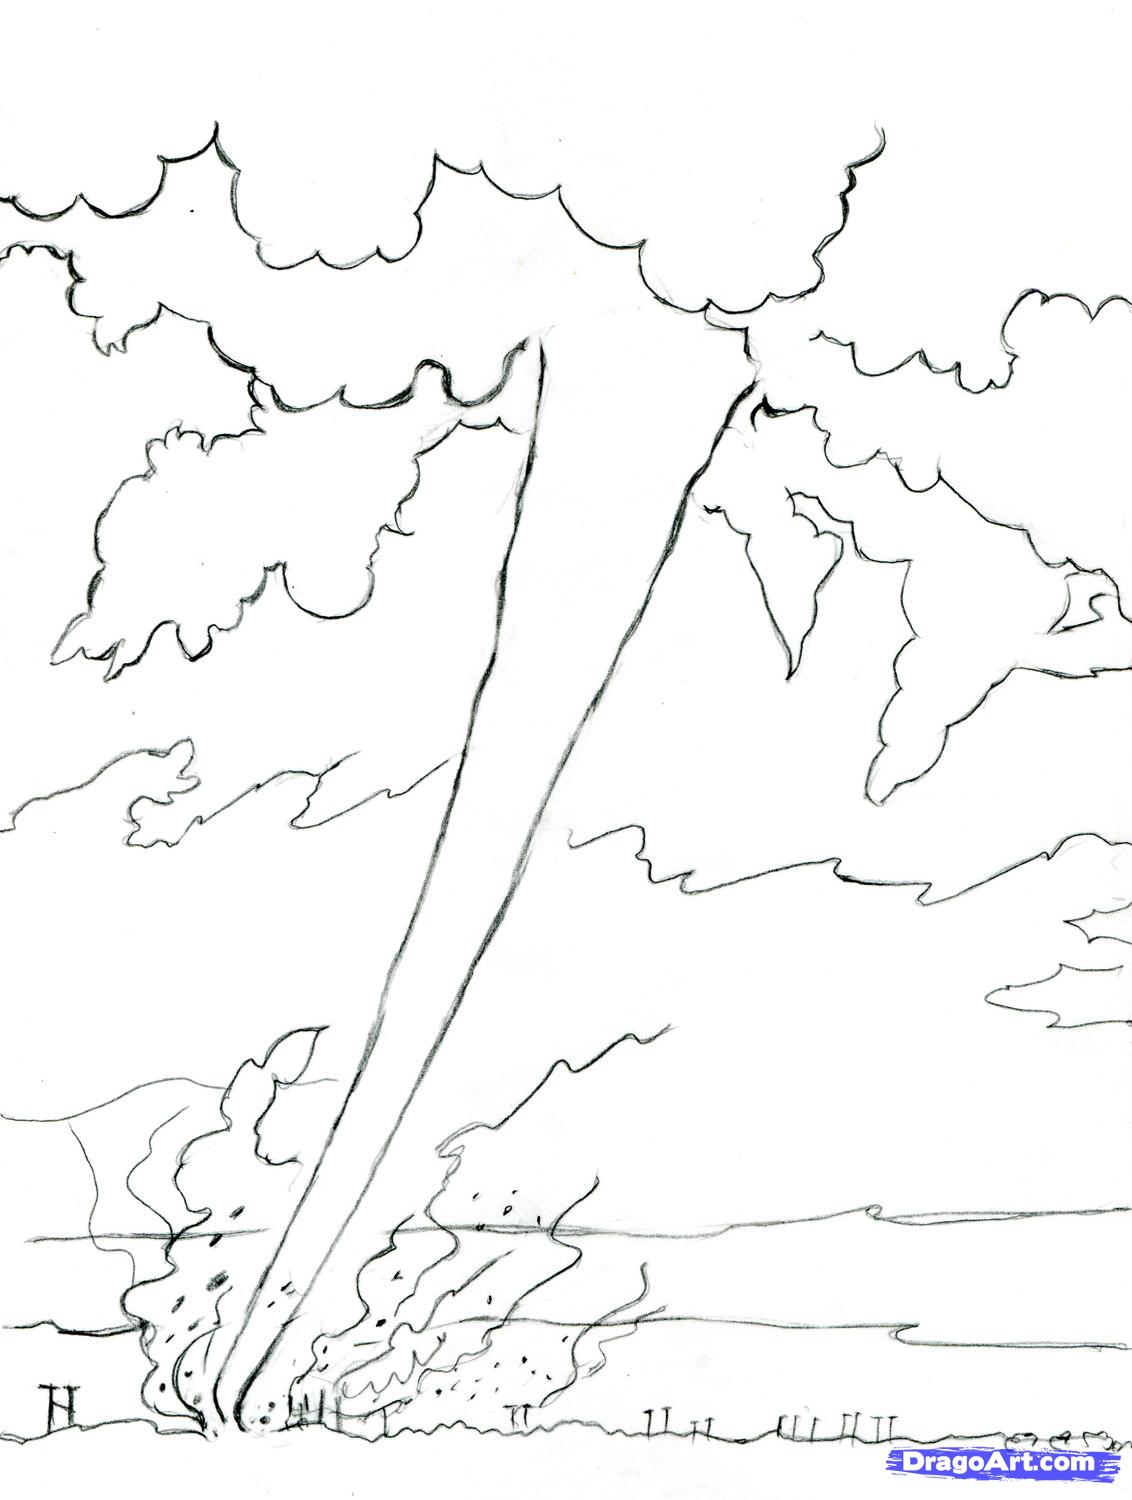 Tornado coloring pages to download and print for free